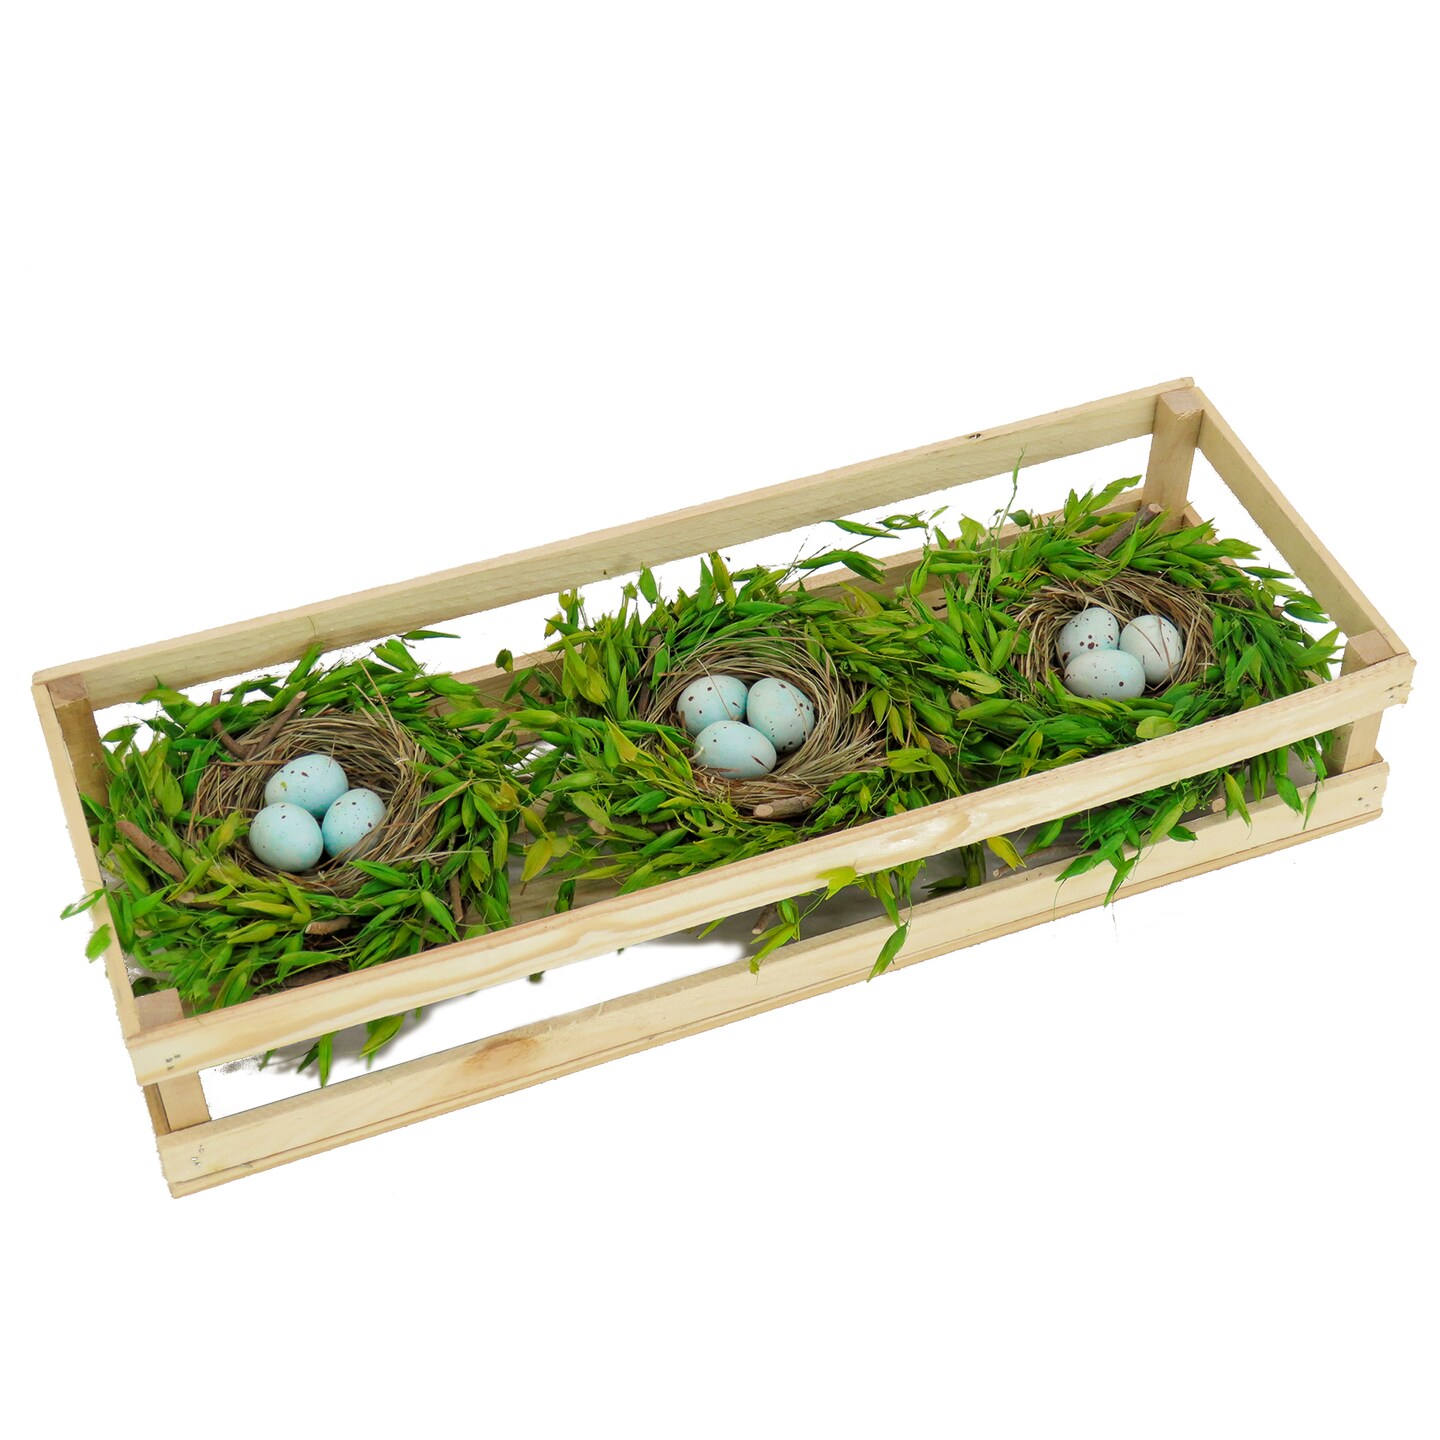 National Tree Company Artificial Triple Nest Table Decoration, Wooden Centerpiece, Includes 3 Bird&#x27;s Nests with Pastel Eggs, Easter Collection, 17 Inches